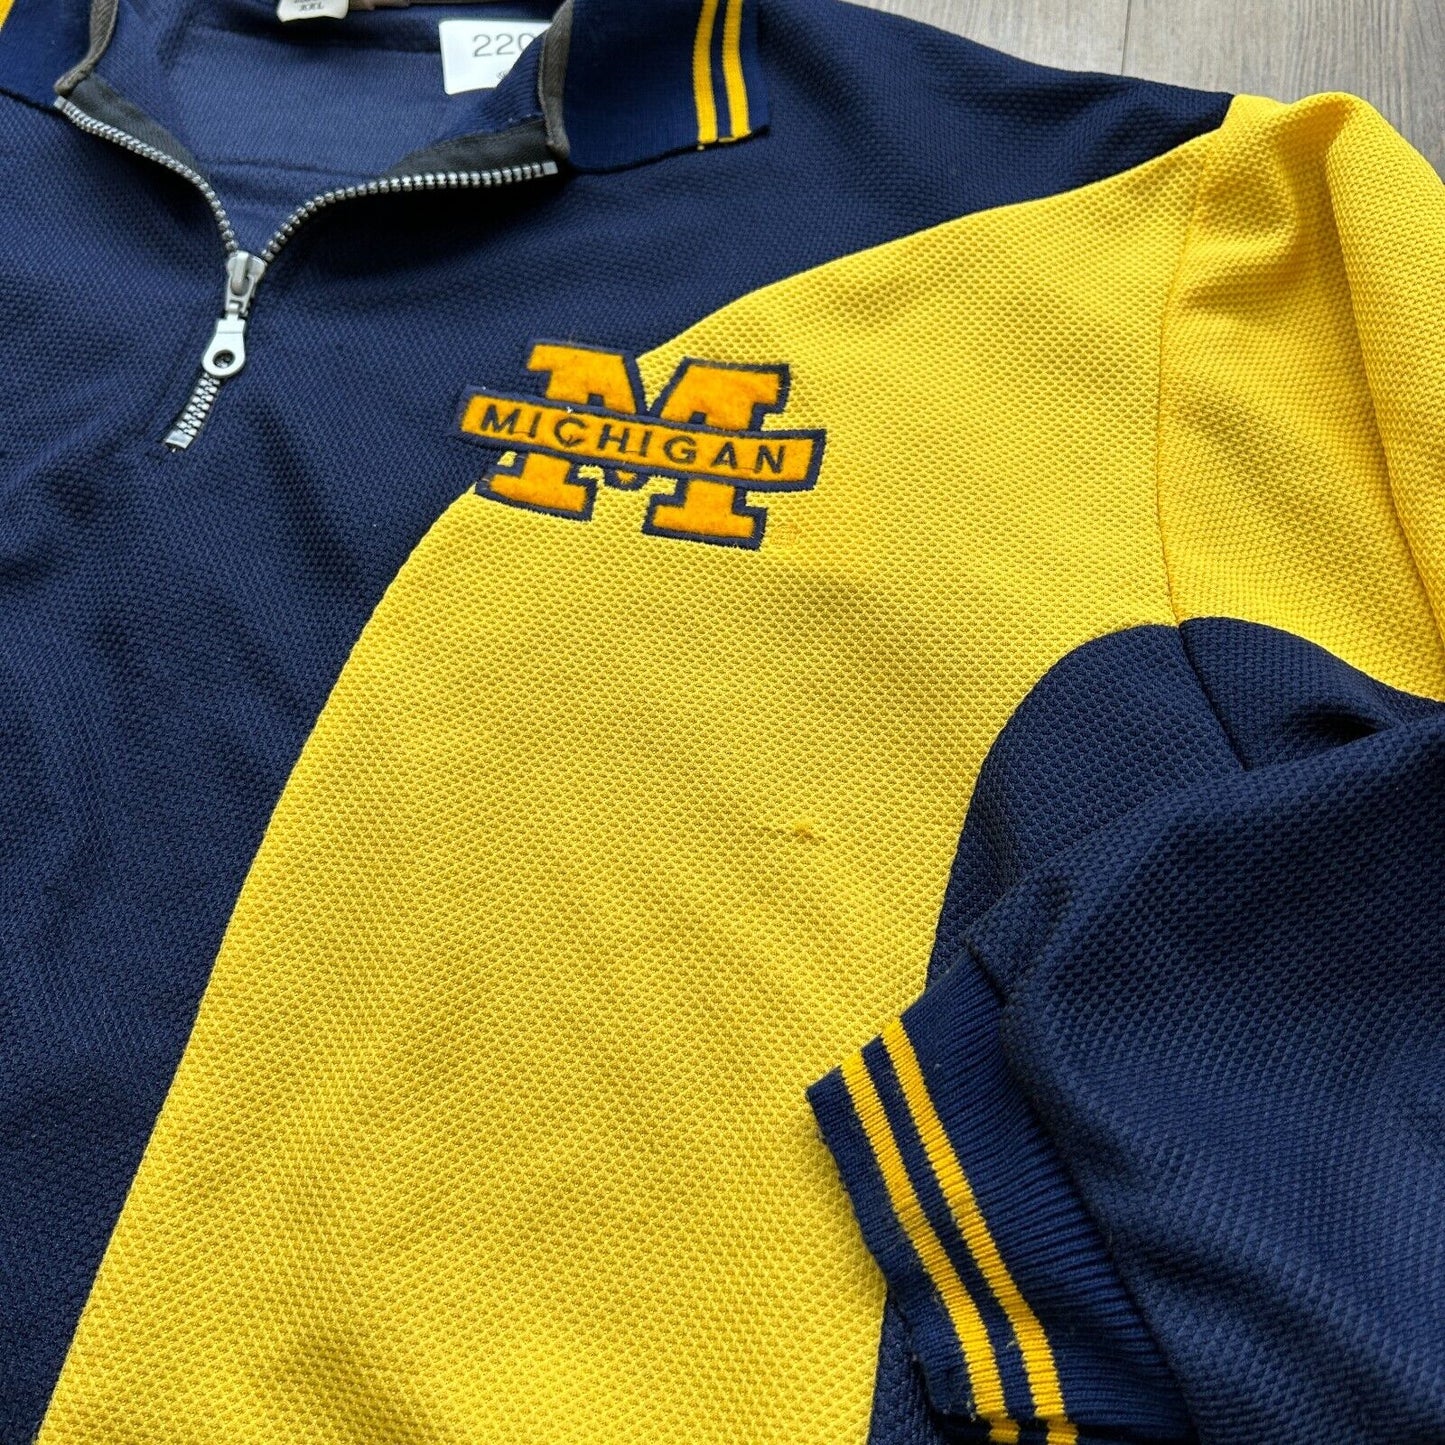 VINTAGE 90s | Michigan Wolverines 1/4 Zip Jersey Rugby Polo Shirt sz XXL Adult